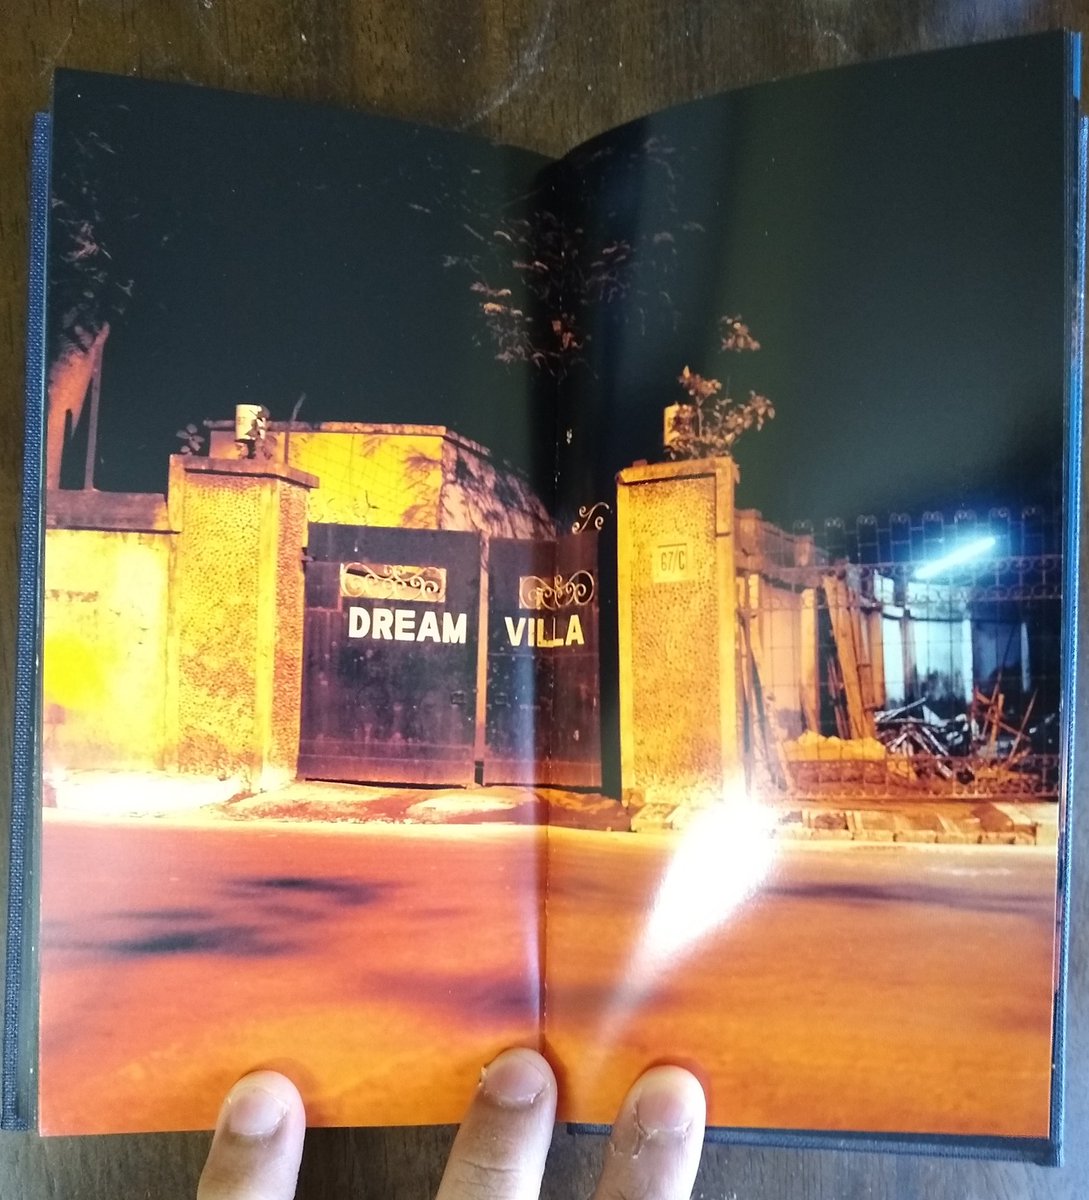 Stealing  @saavadikadha's idea and showing off spreads from a few of my favourite photobooks. First up, Dayanita Singh's 'Dream Villa'.